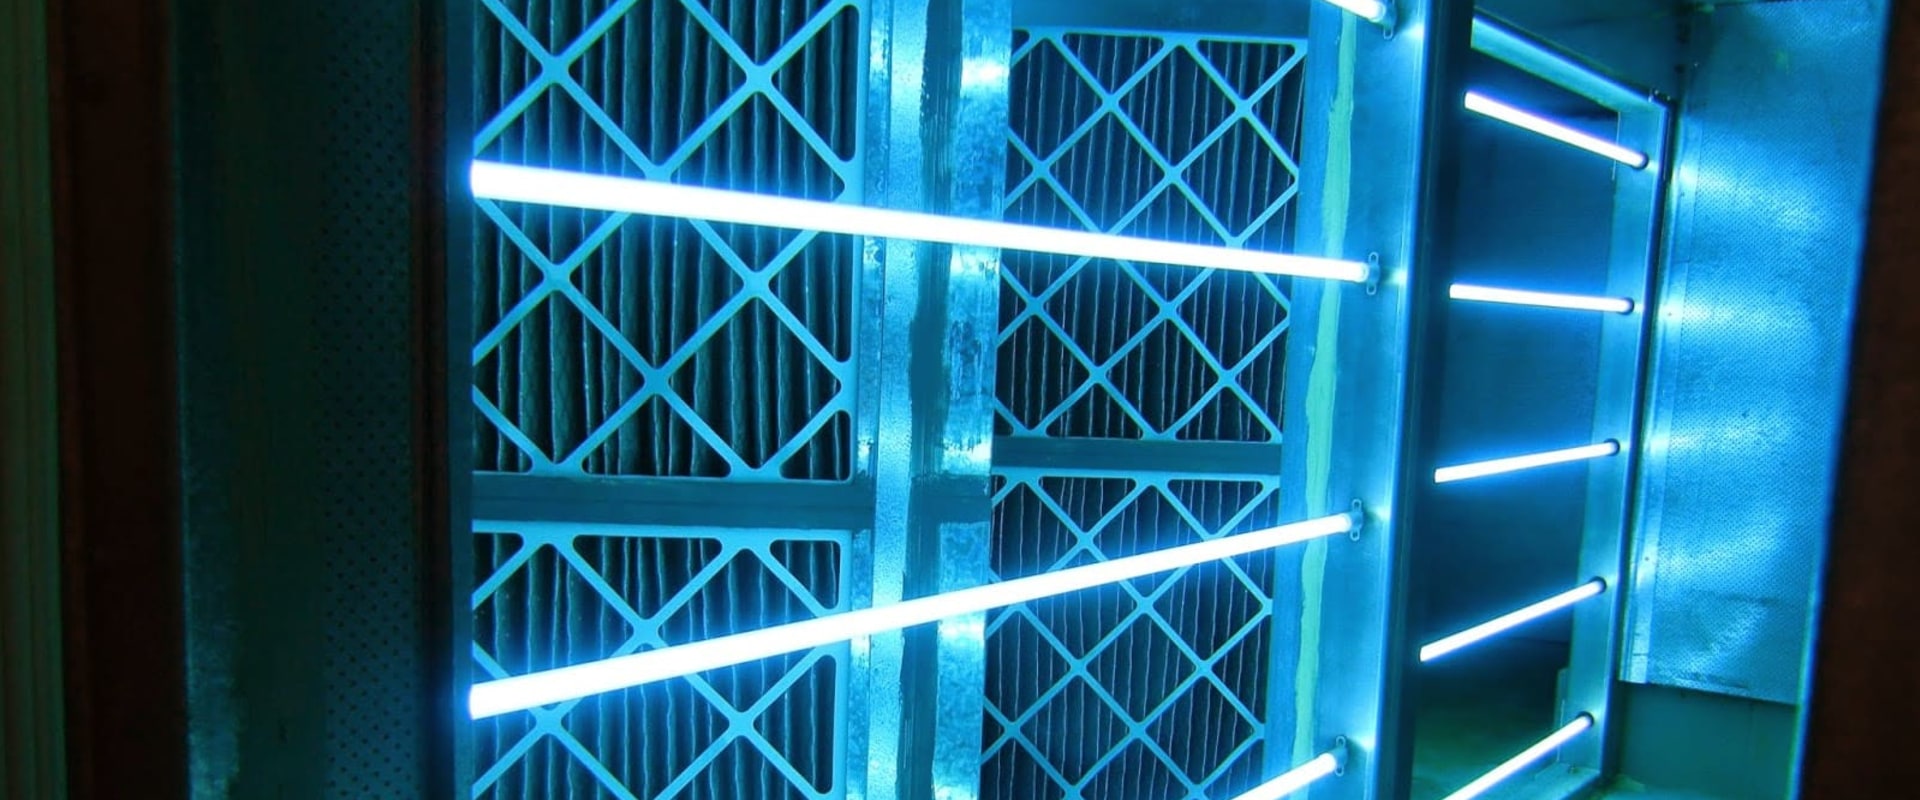 How to Safely Install a UV Light in West Palm Beach, FL